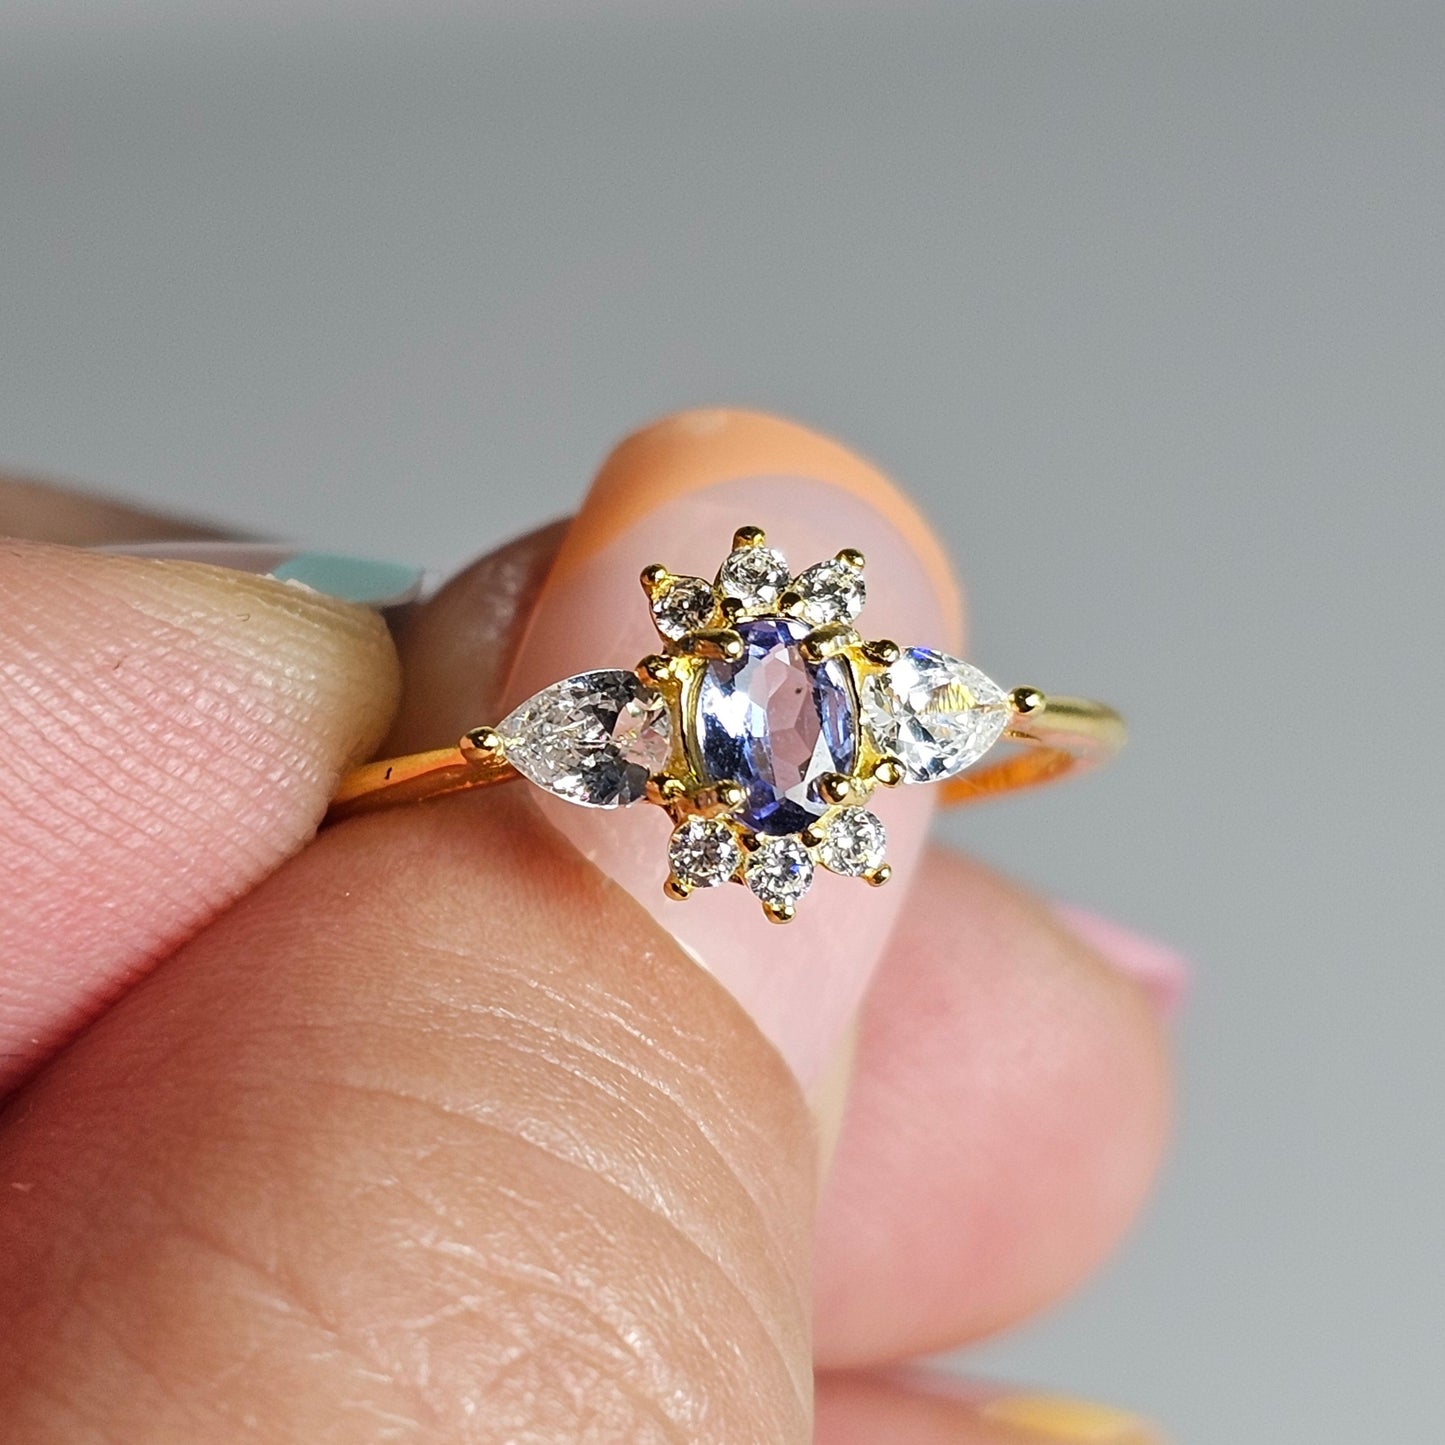 This adjustable ring is crafted from gold plated sterling silver and features a beautiful oval shaped Tanzanite centre stone surrounded with zircon.